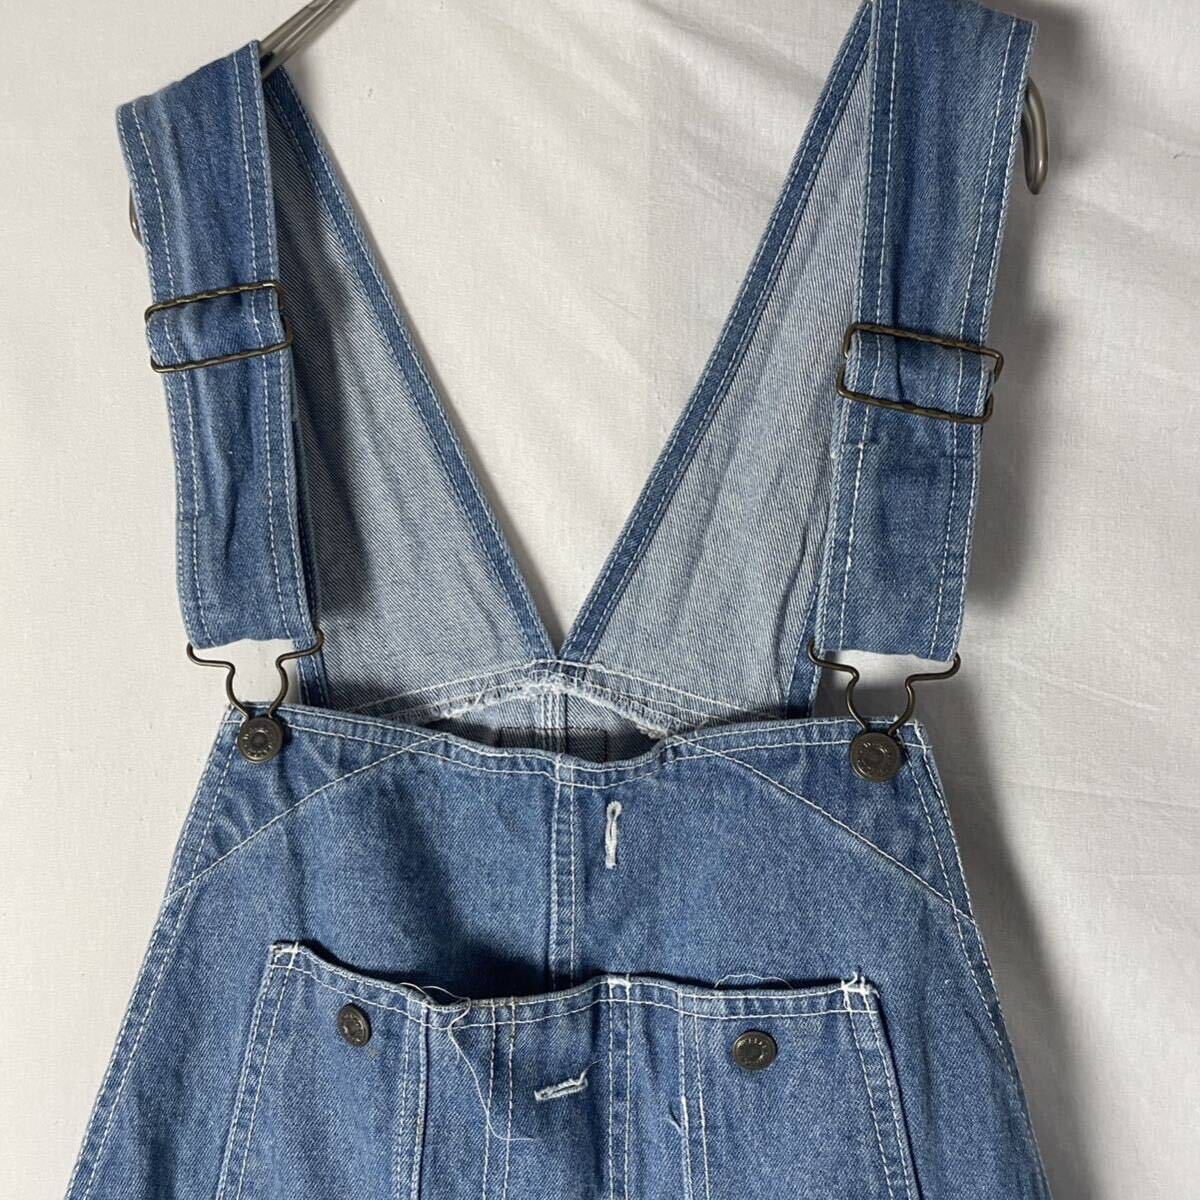 walls Denim overall old clothes 36×32 blue WORKWEAR overall 